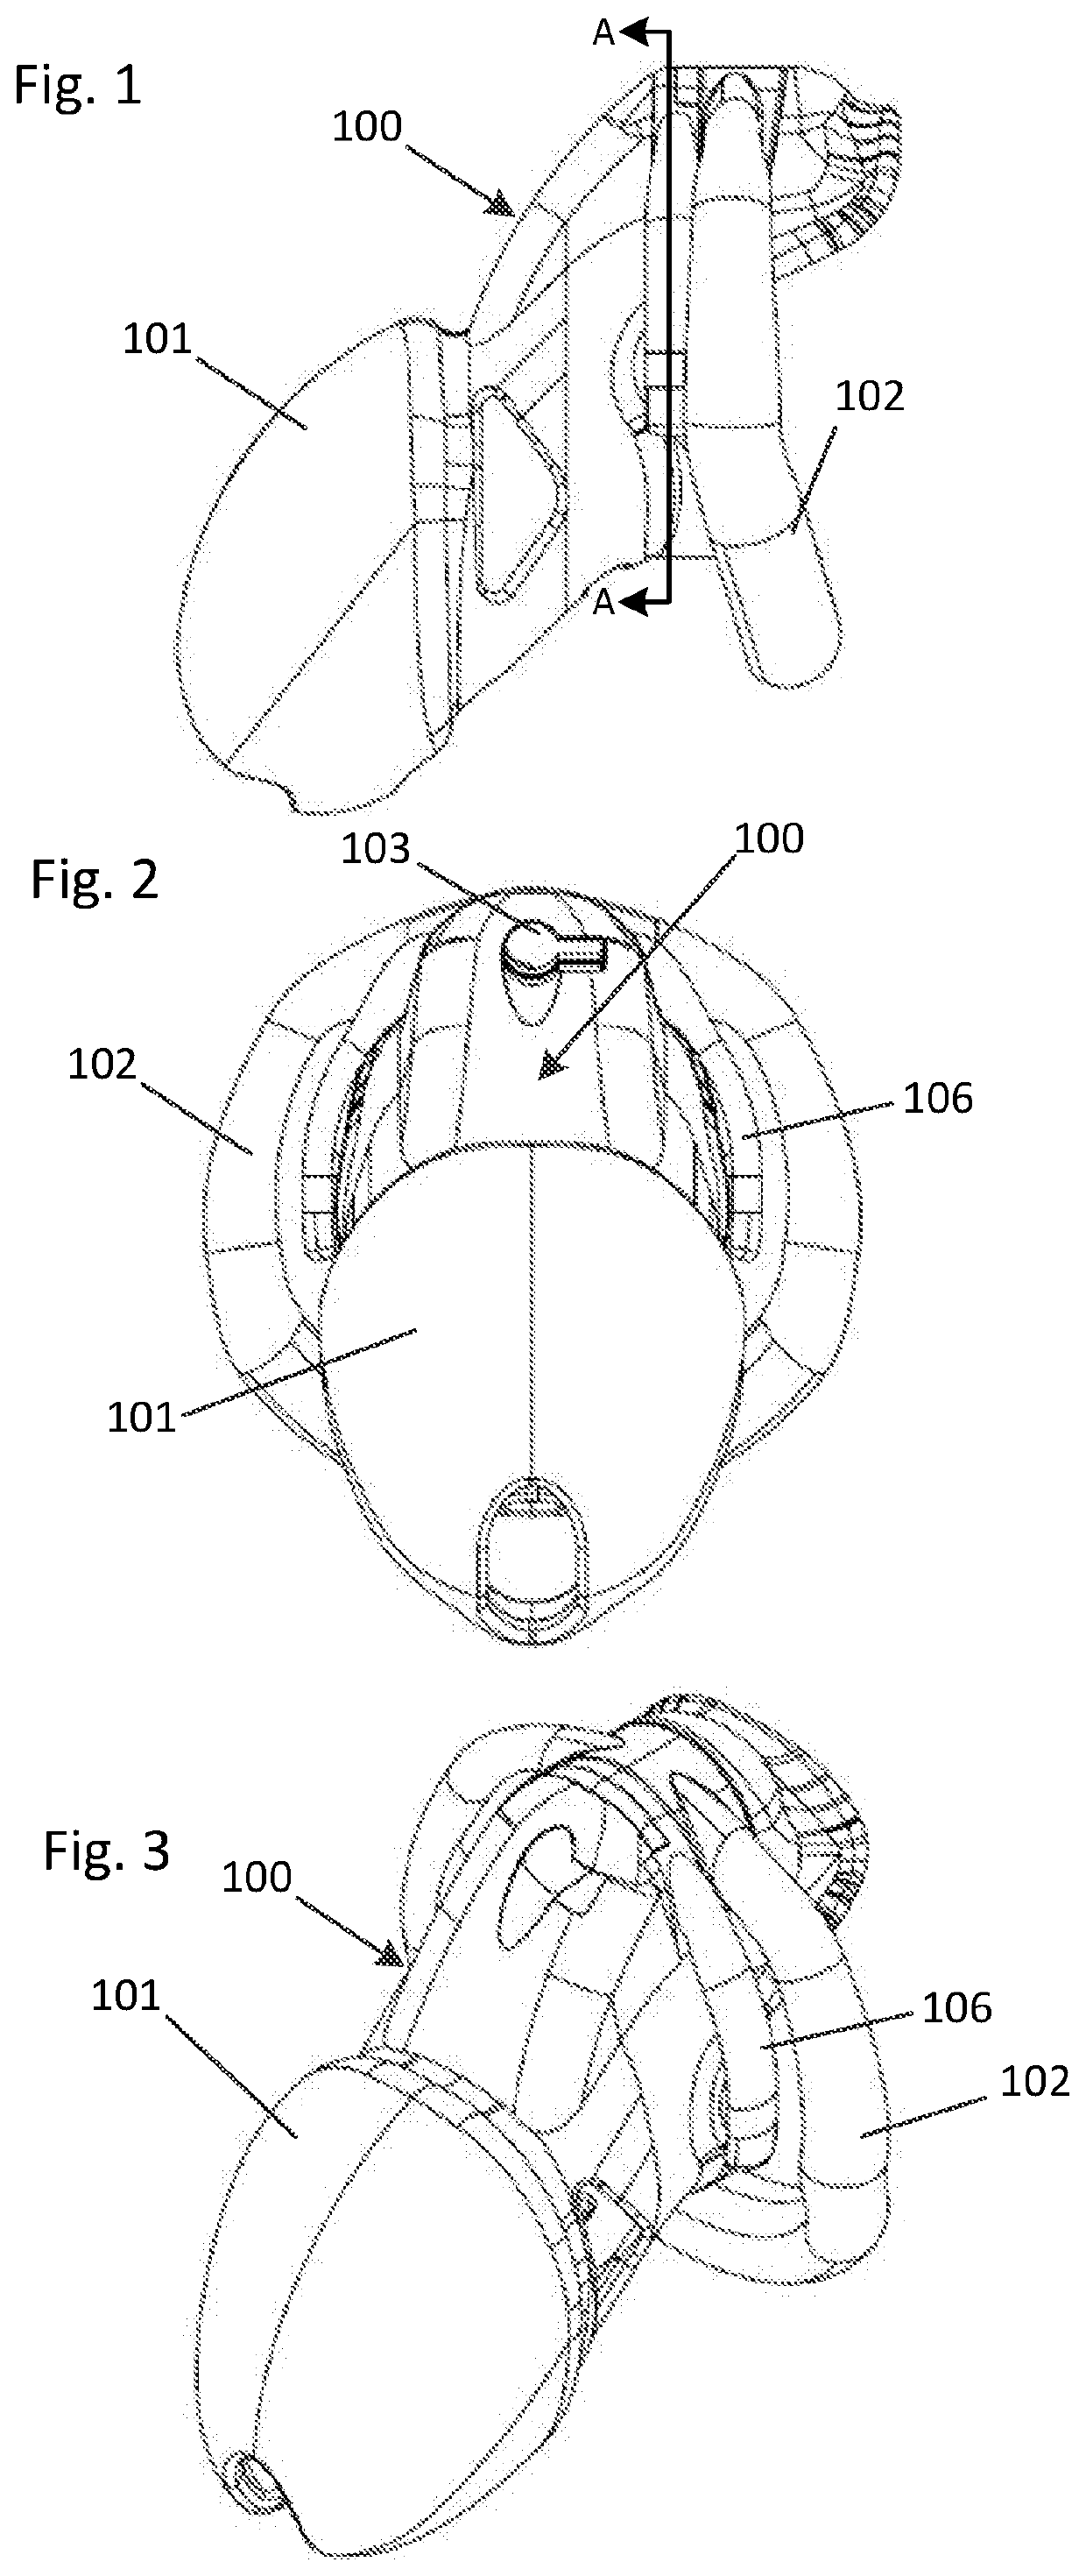 Resin-based male chastity device utilizing Anti-pullouts and multiple overmolded synthetic regions and coverings